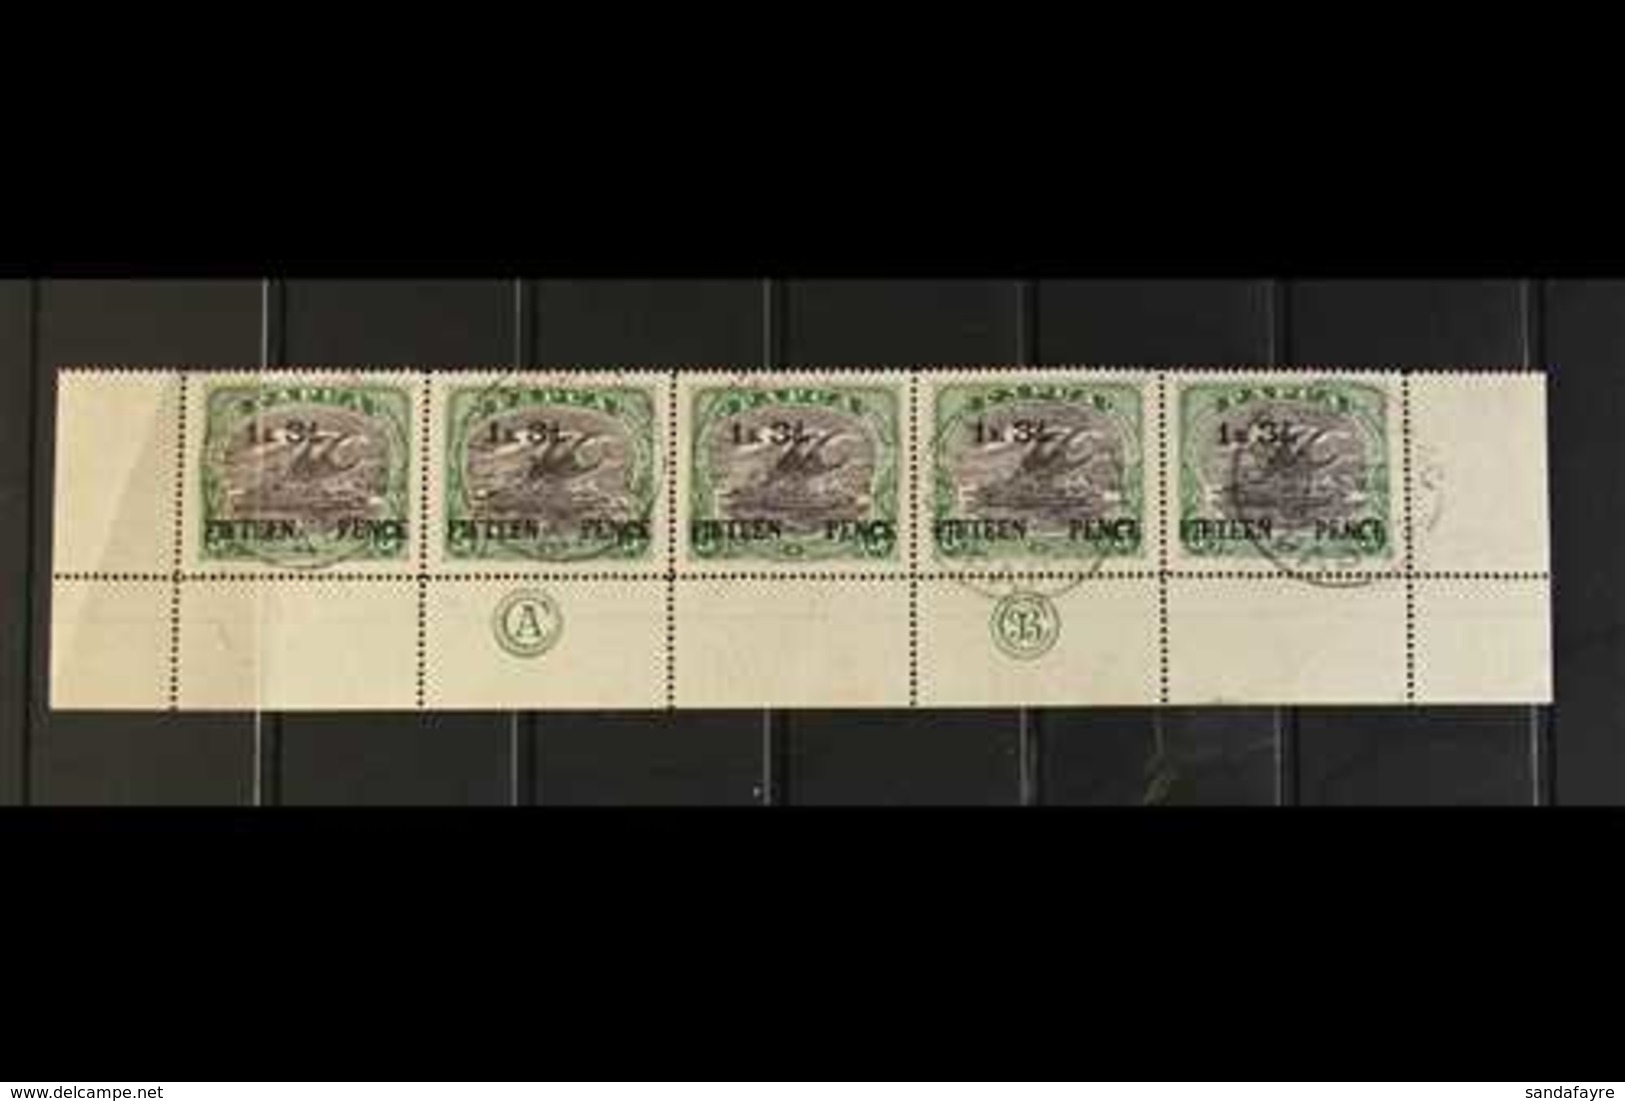 1931 1s3d On 5s Black And Deep Green, SG 123, Complete Lower Row Of The Sheet Showing JBC Imprint, Fine Port Moresby Cds - Papouasie-Nouvelle-Guinée